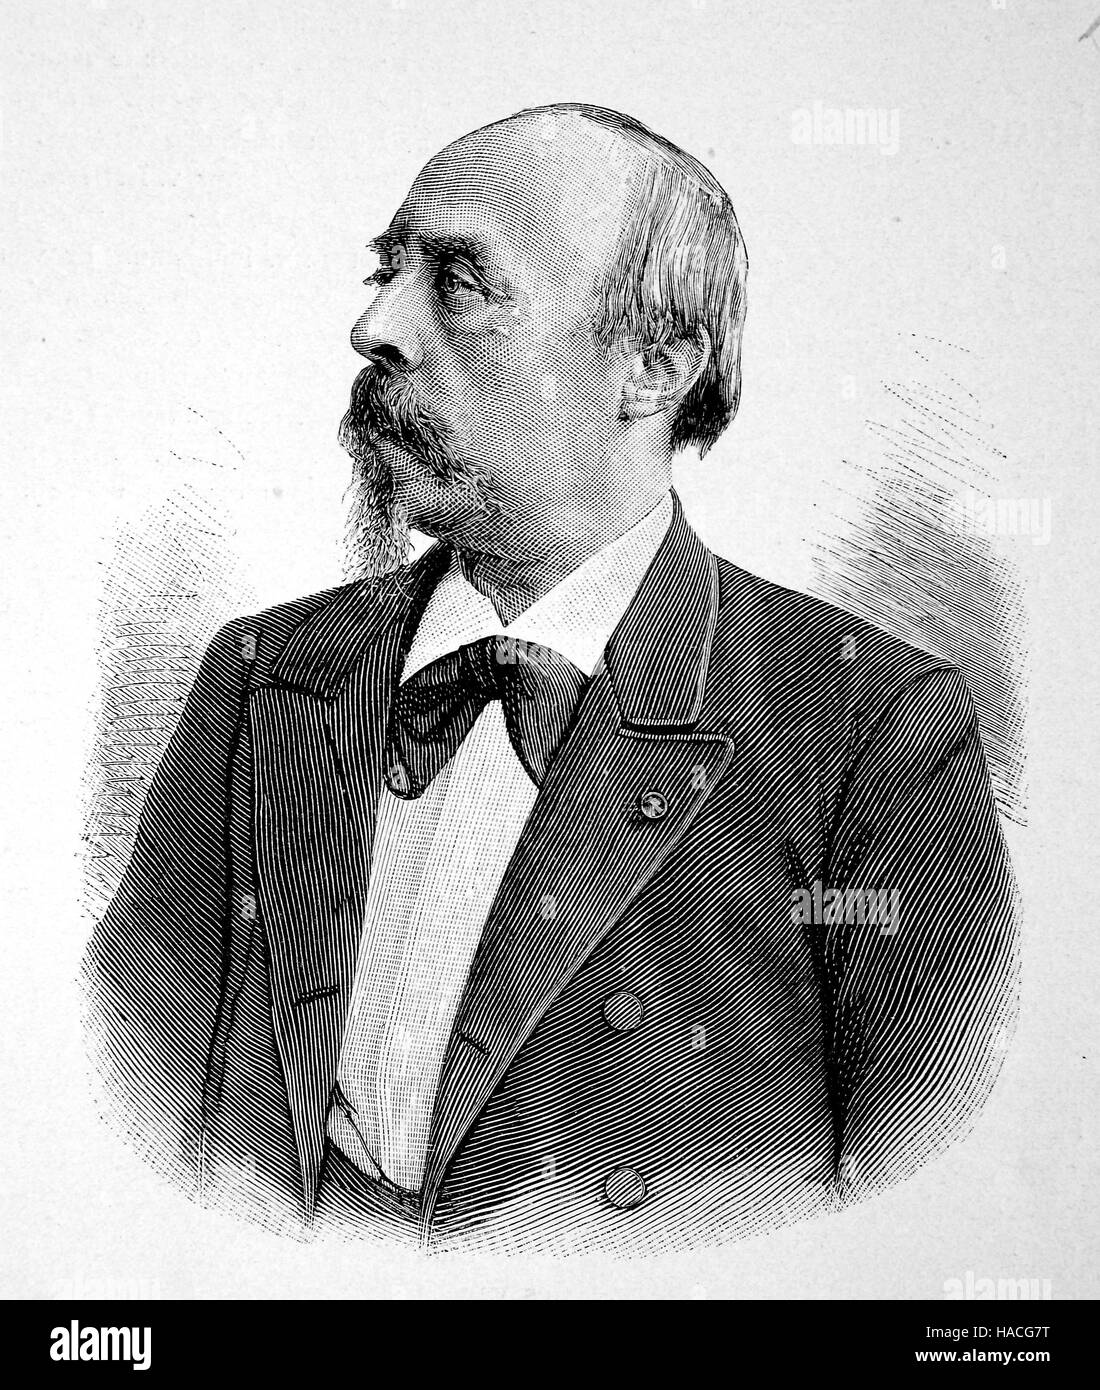 Baron Hans Guido von Buelow, January 8, 1830 - February 12, 1894, was a German conductor, virtuoso pianist, and composer of the Romantic era, historic illustration, woodcut Stock Photo